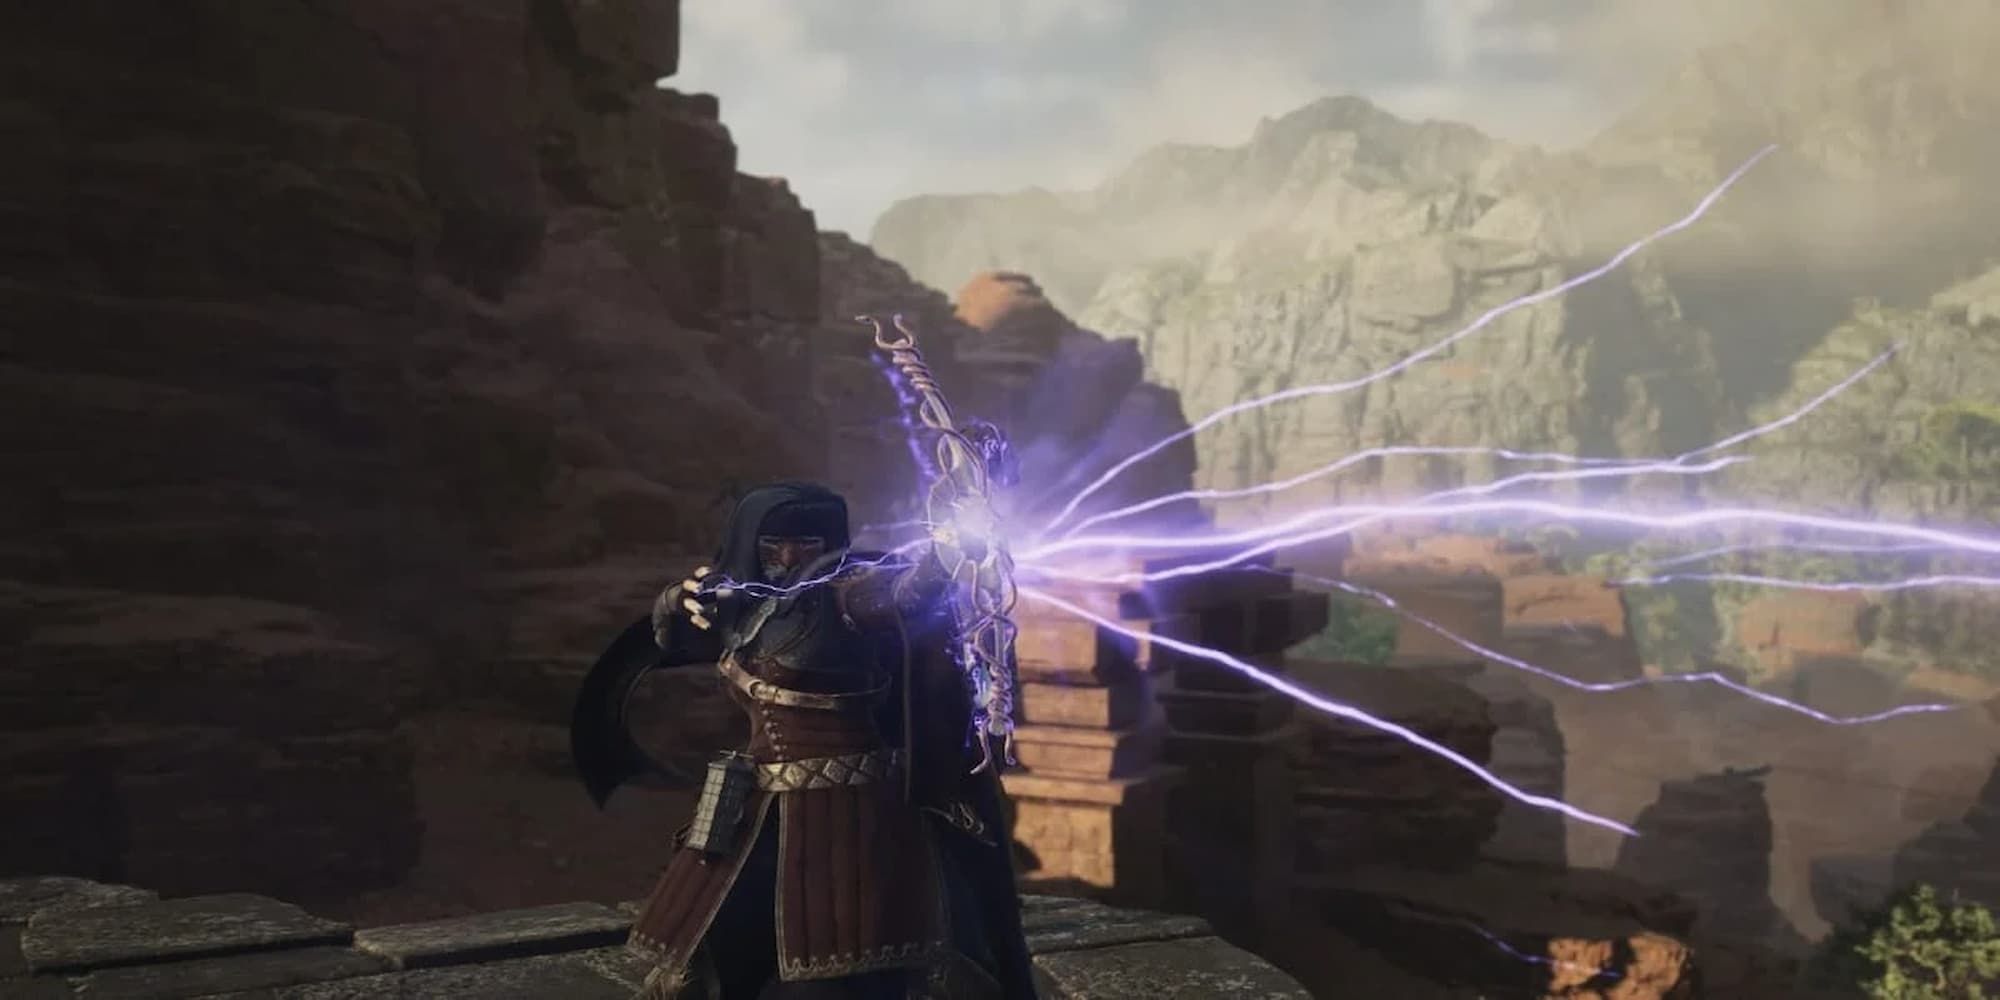 A Magick Archer Charging Up A Powerful Attack